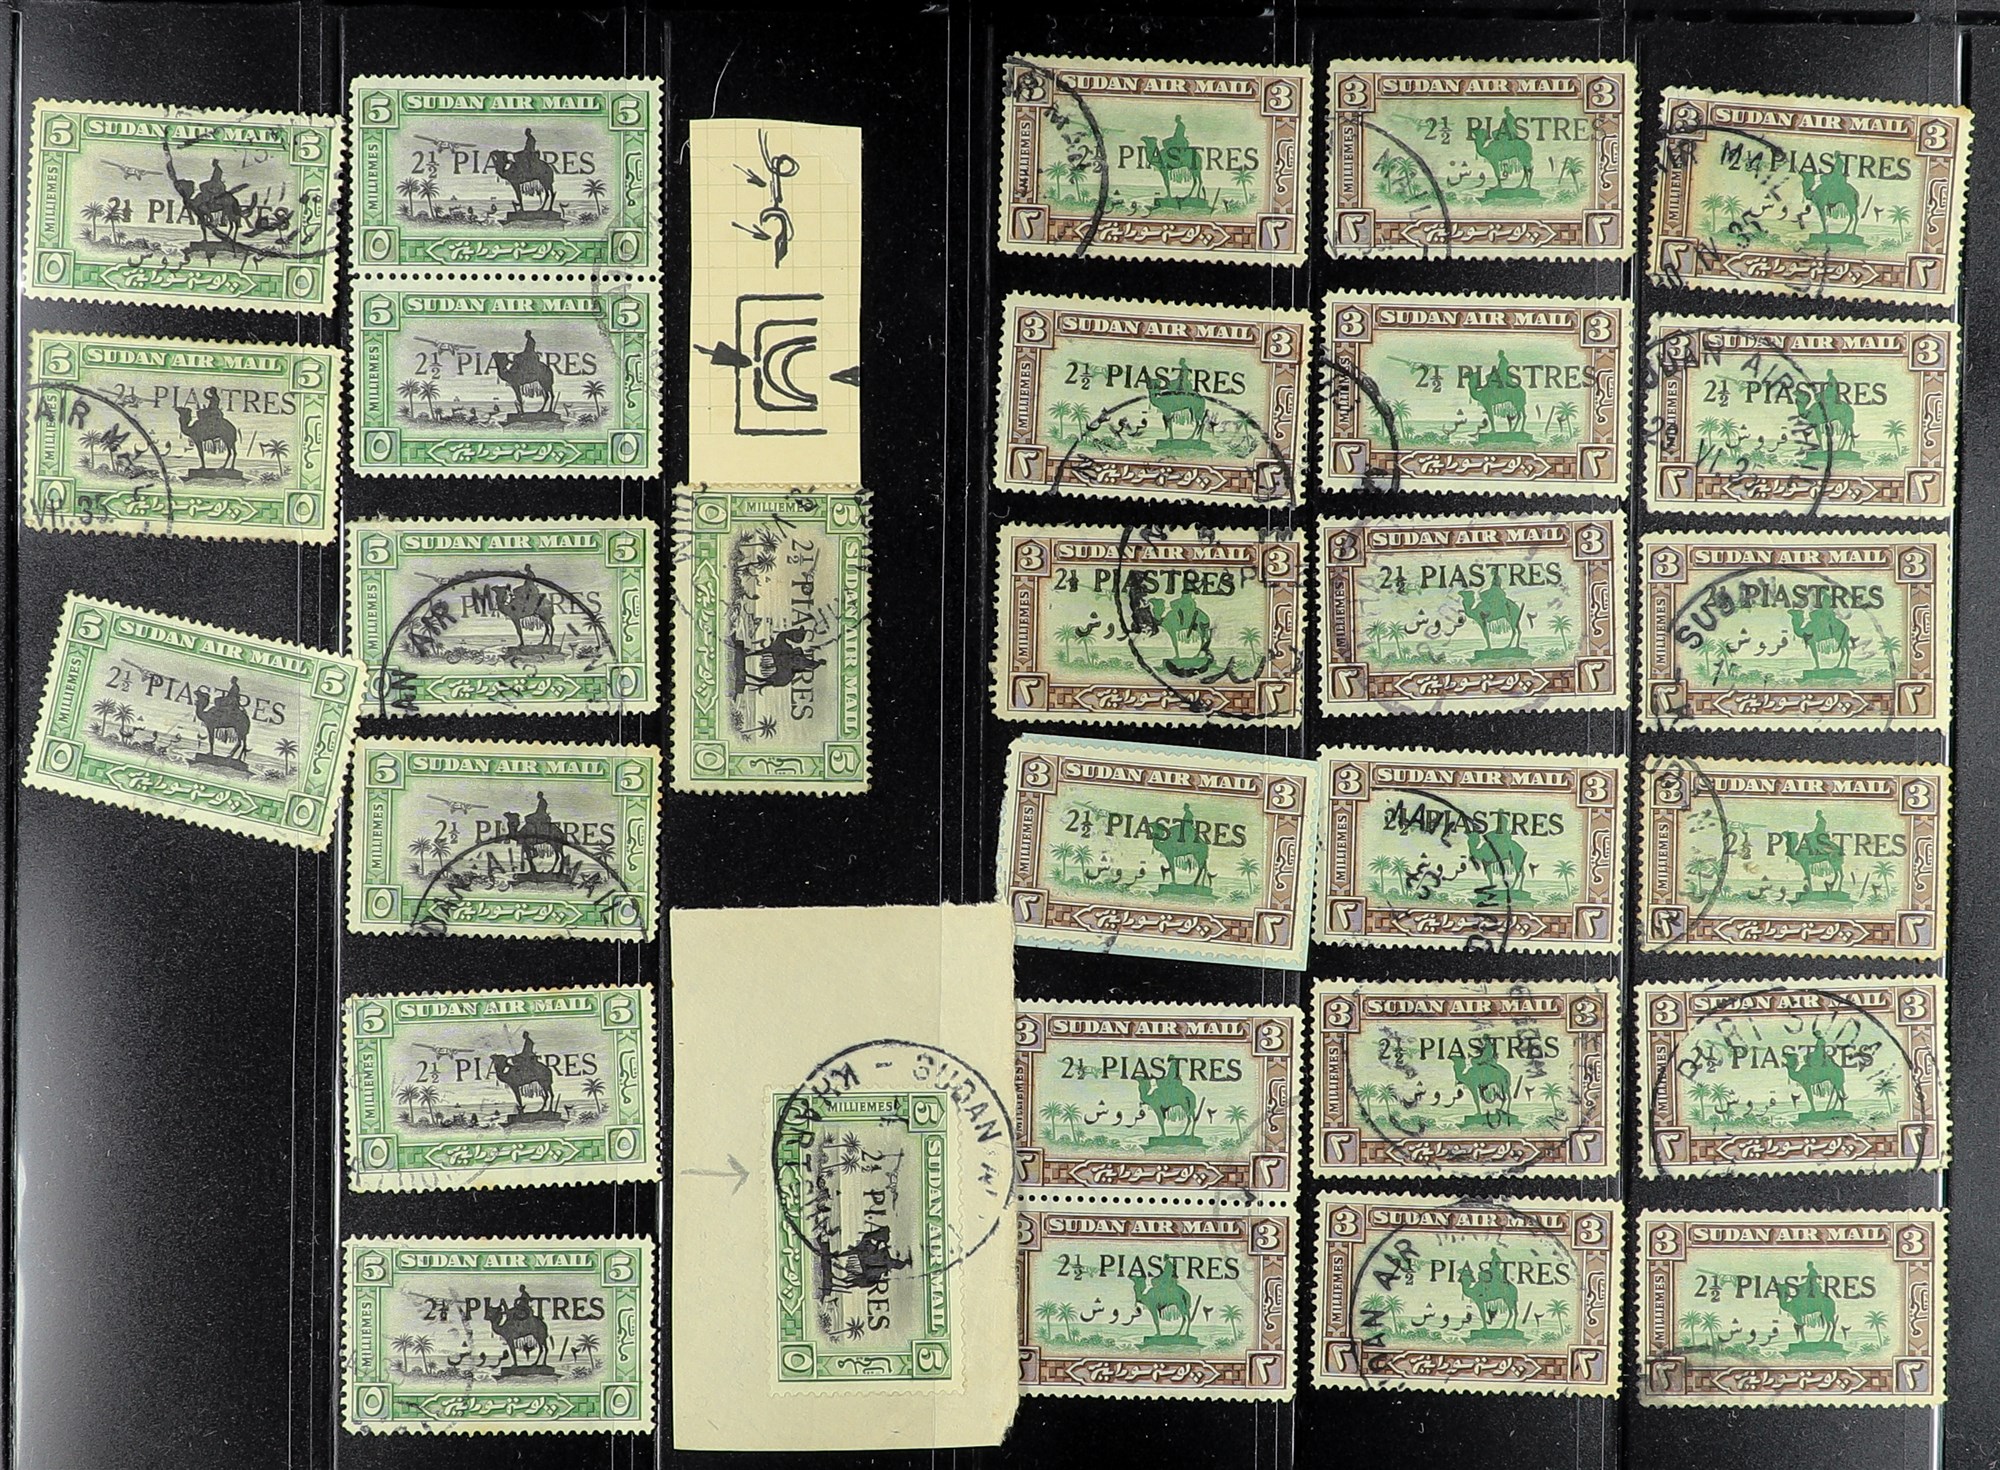 SUDAN 1898 - 1954 SPECIALISED USED RANGES IN 5 ALBUMS. Around 12,000 used stamps with many - Image 18 of 41